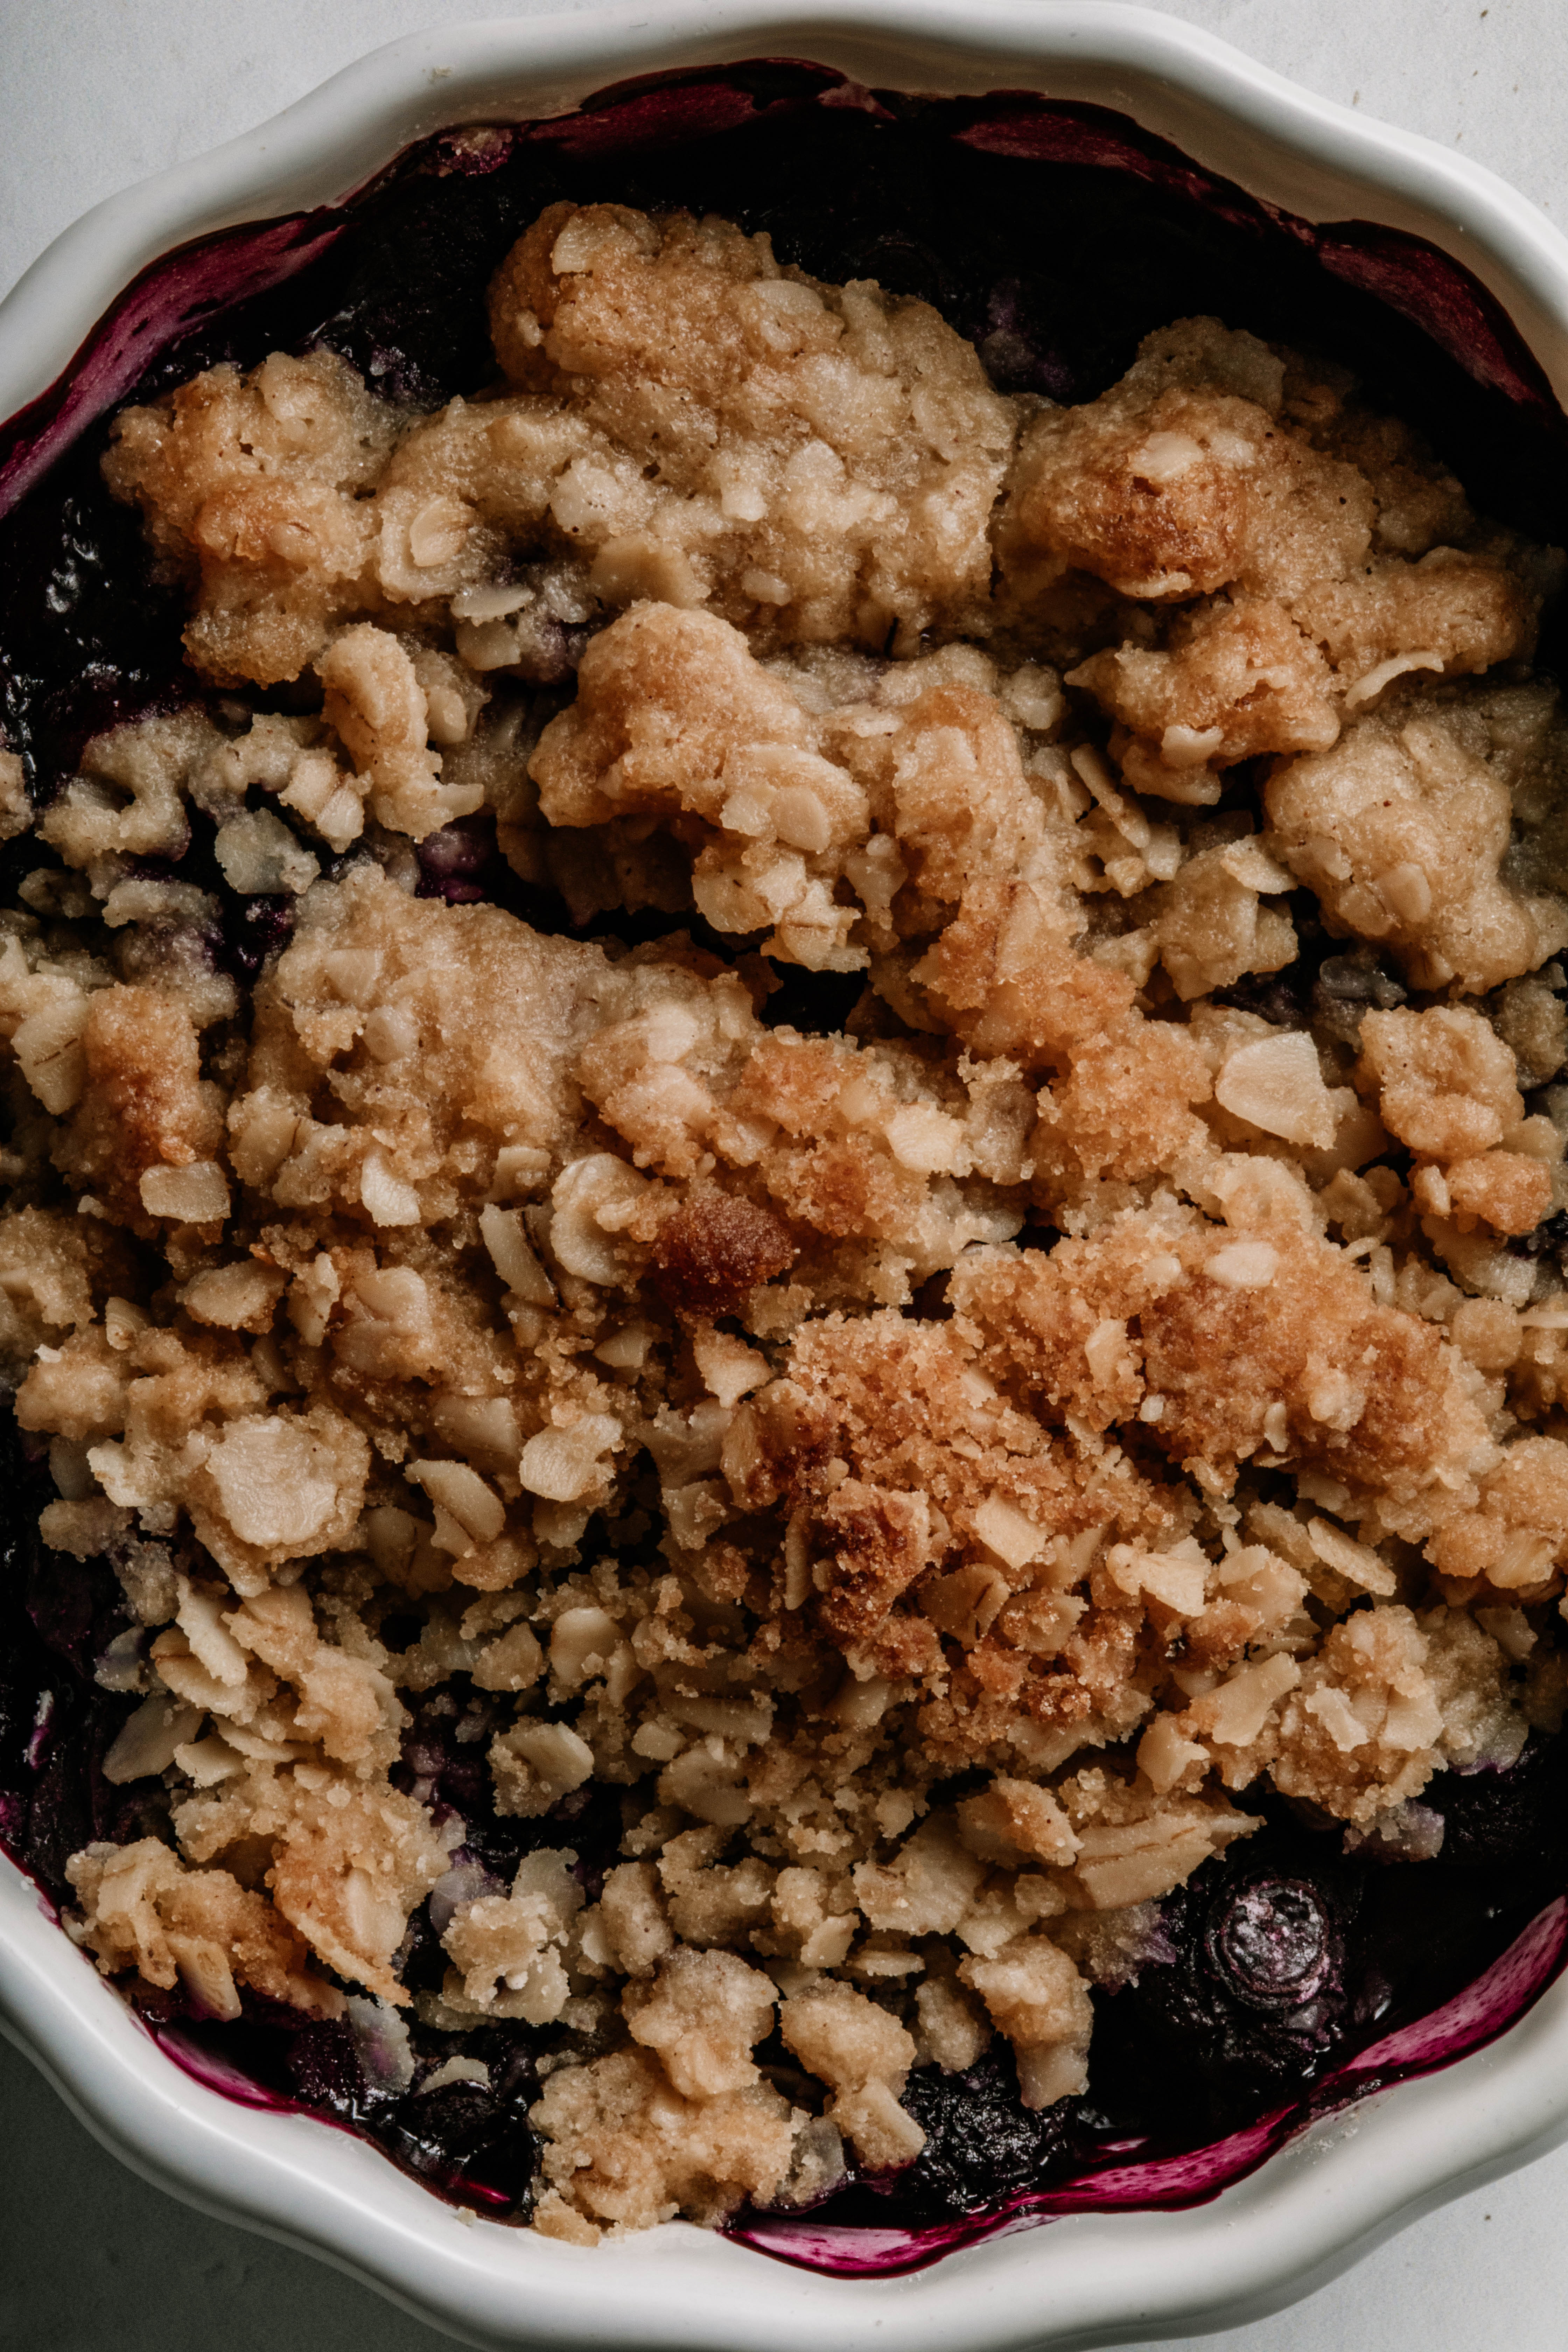 Ease blueberry crisp recipe image by Cashmere & Cocktails